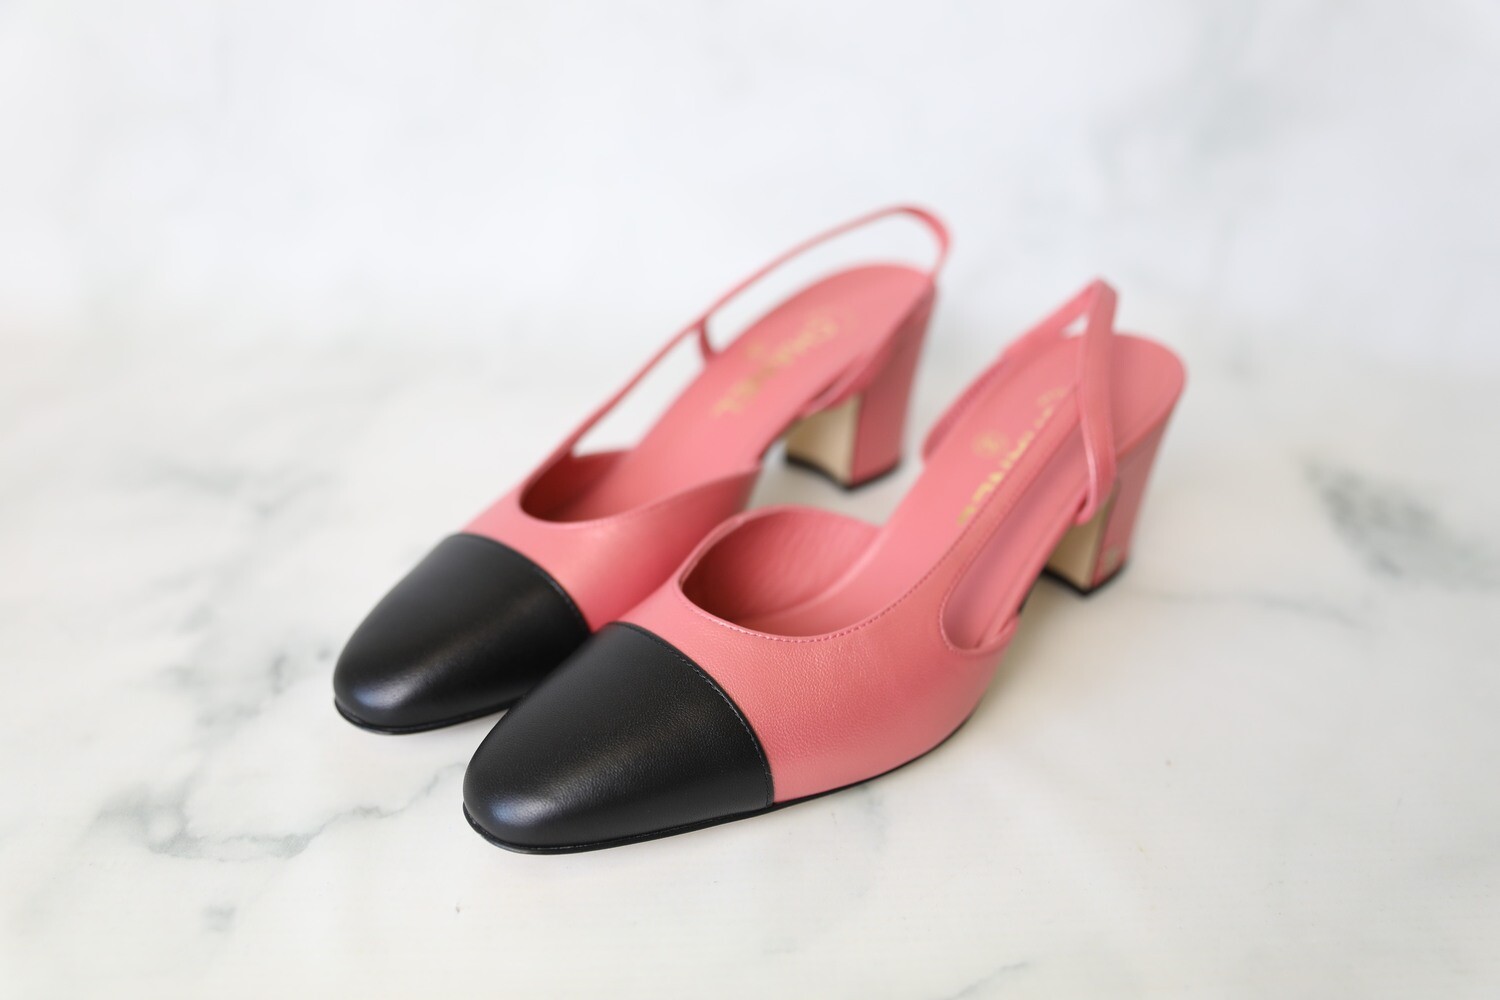 Chanel Slingback Pumps, Mid Heel, Pink and Black. Size 39.5, New in Dustbag  WA001 - Julia Rose Boston